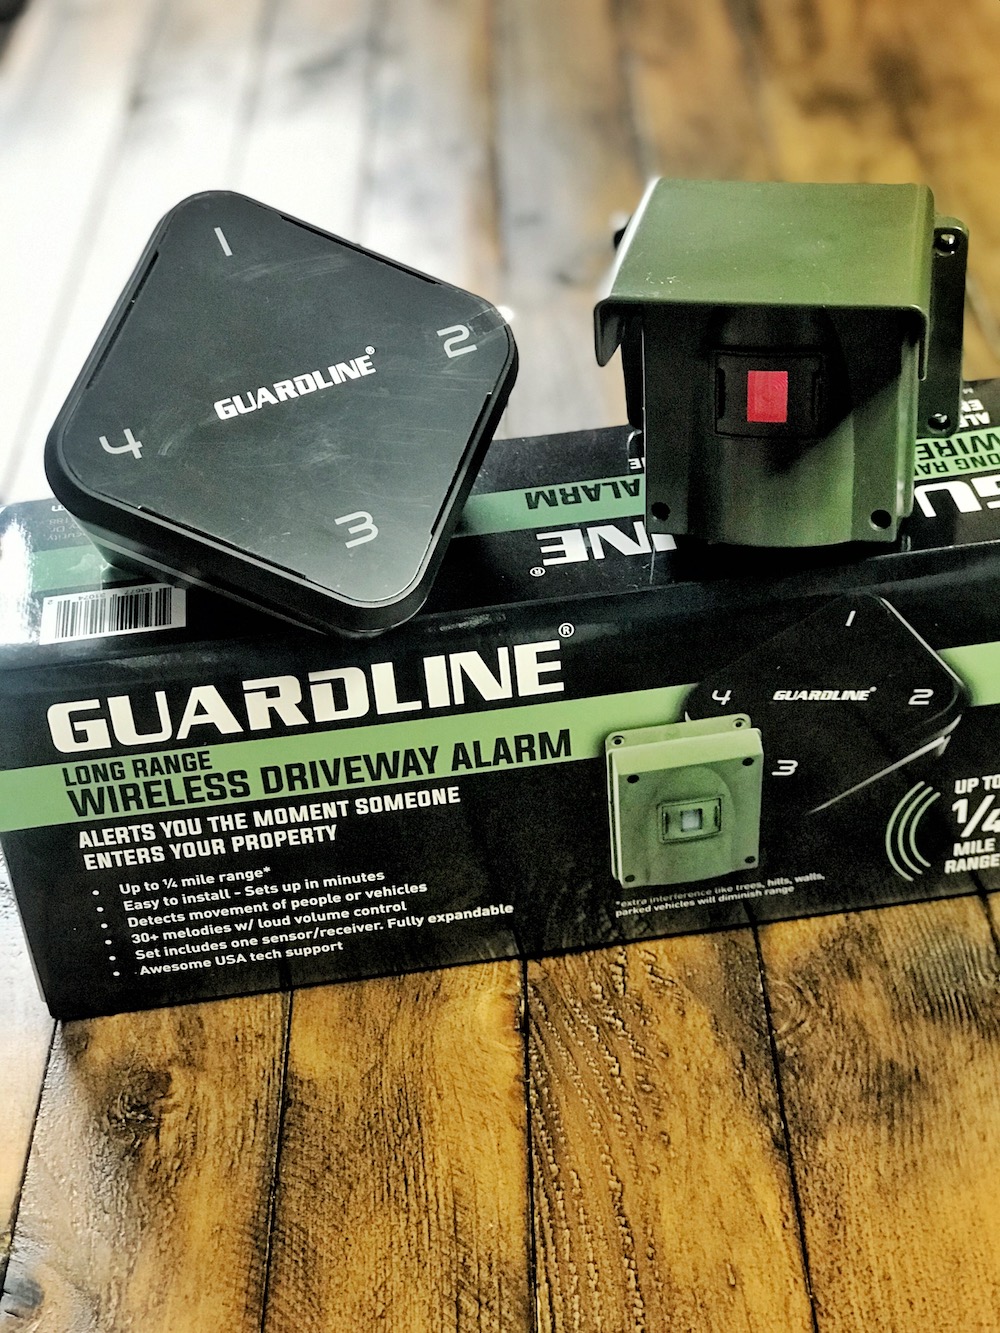 Guardline product and box